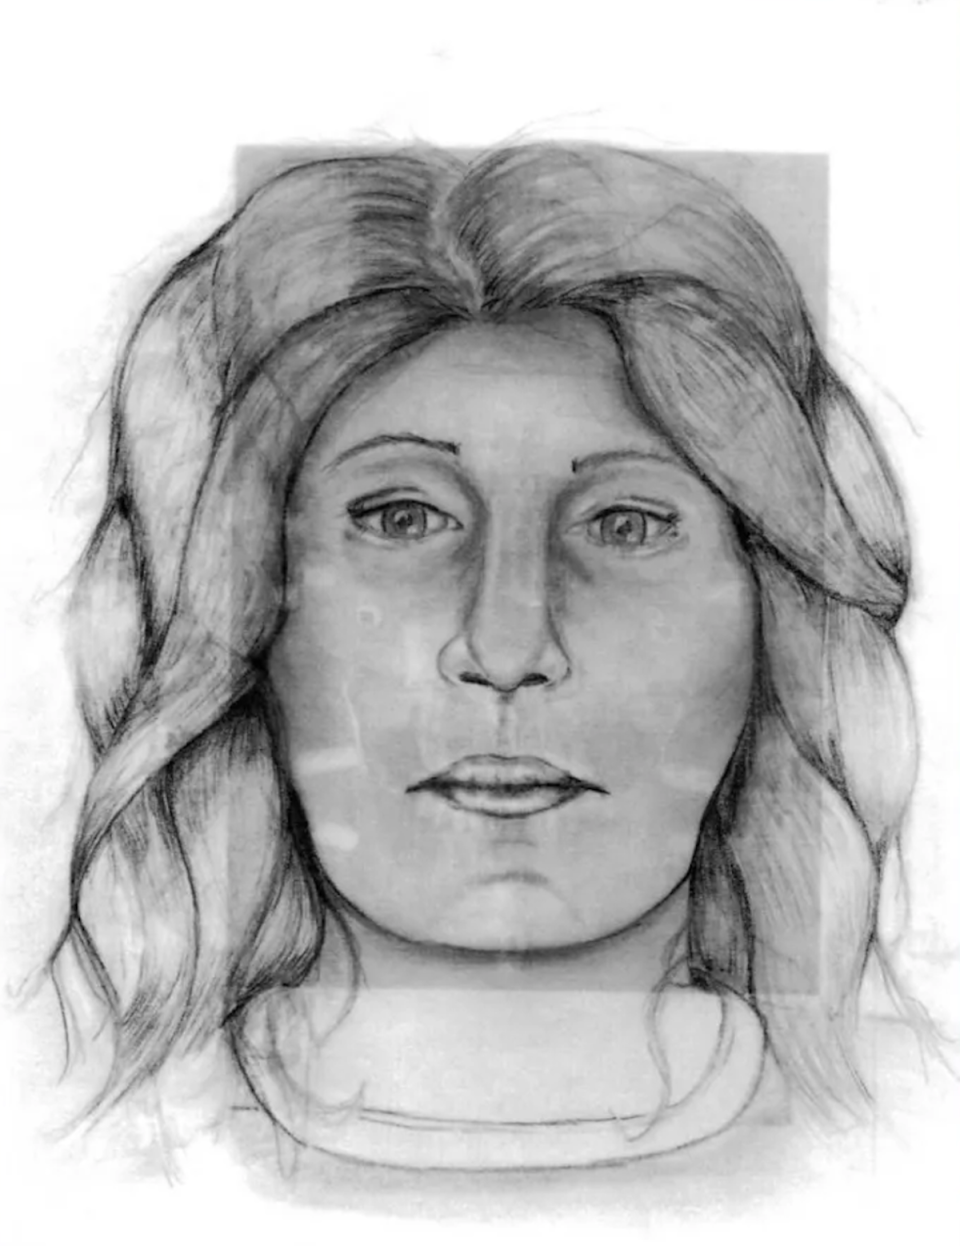 A number of sketches have been made of the woman using a combination of DNA technology, her remains, and a description by Jesperson (Riverside County District Attorney’s Office)